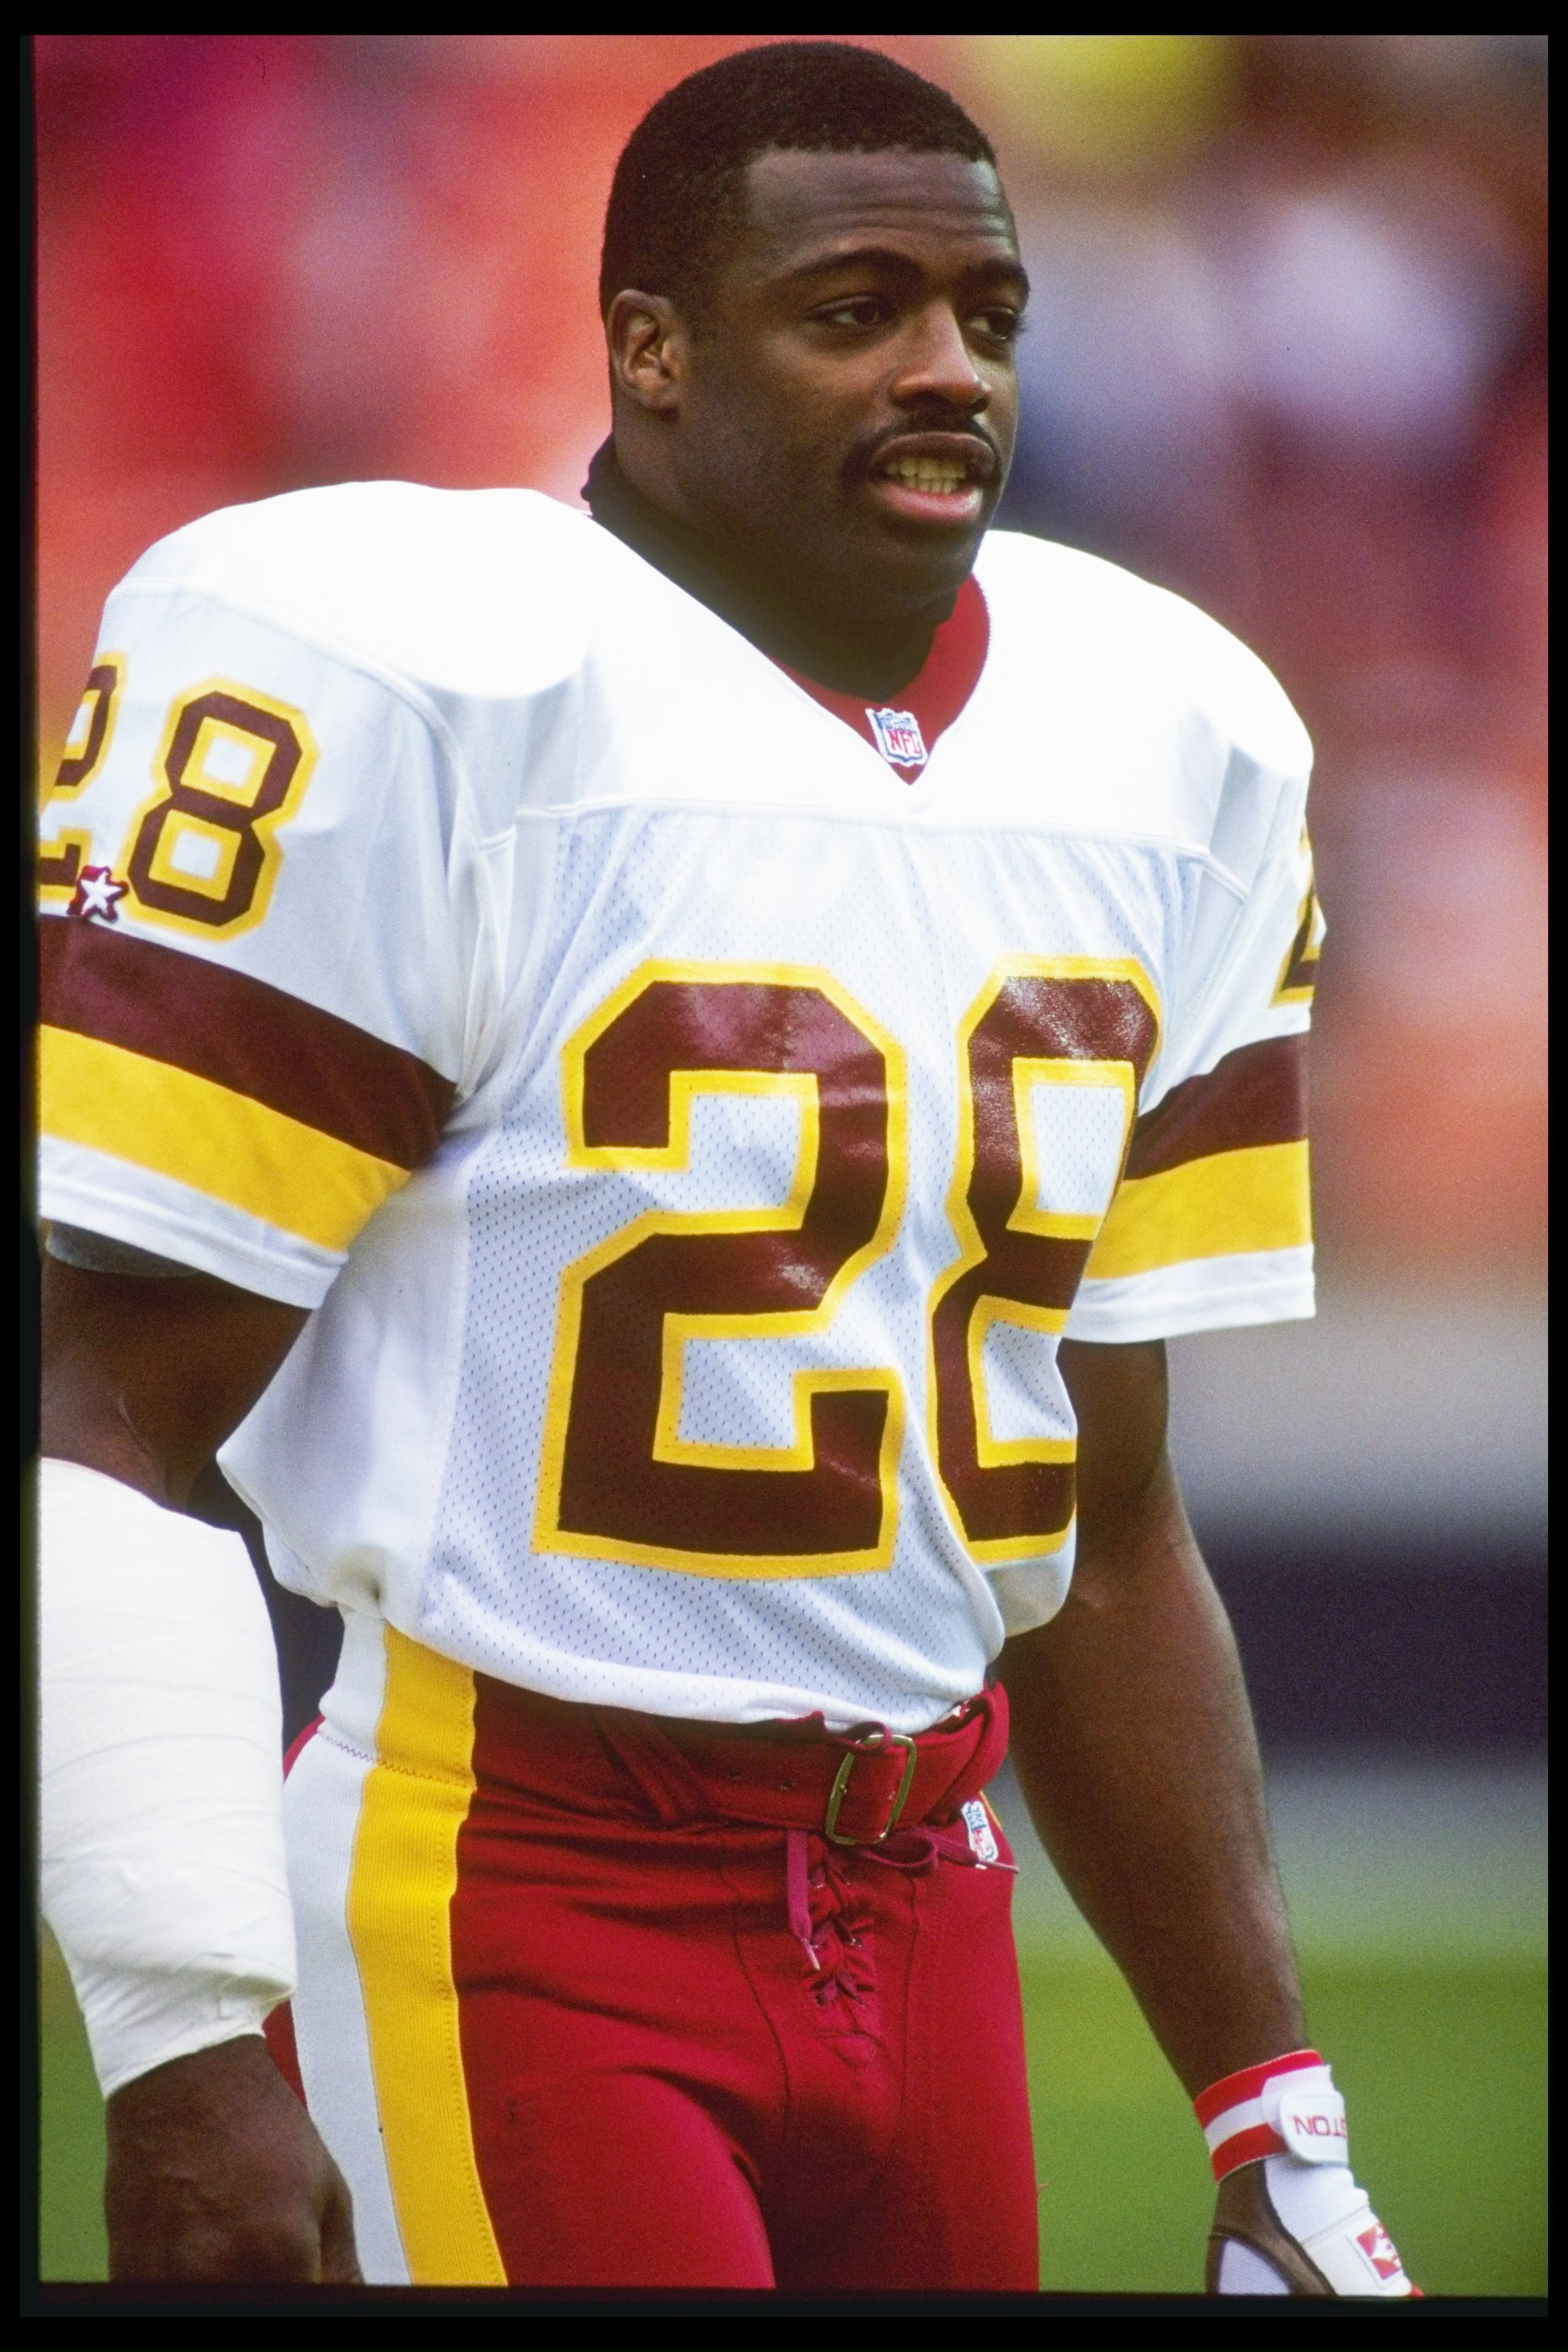 29 Nov 1992: Defensive back Darrell Green of the Washington Redskins during the Redskins 41-3 win over the Phoenix Cardinals at RFK Stadium in Washington, D.C.